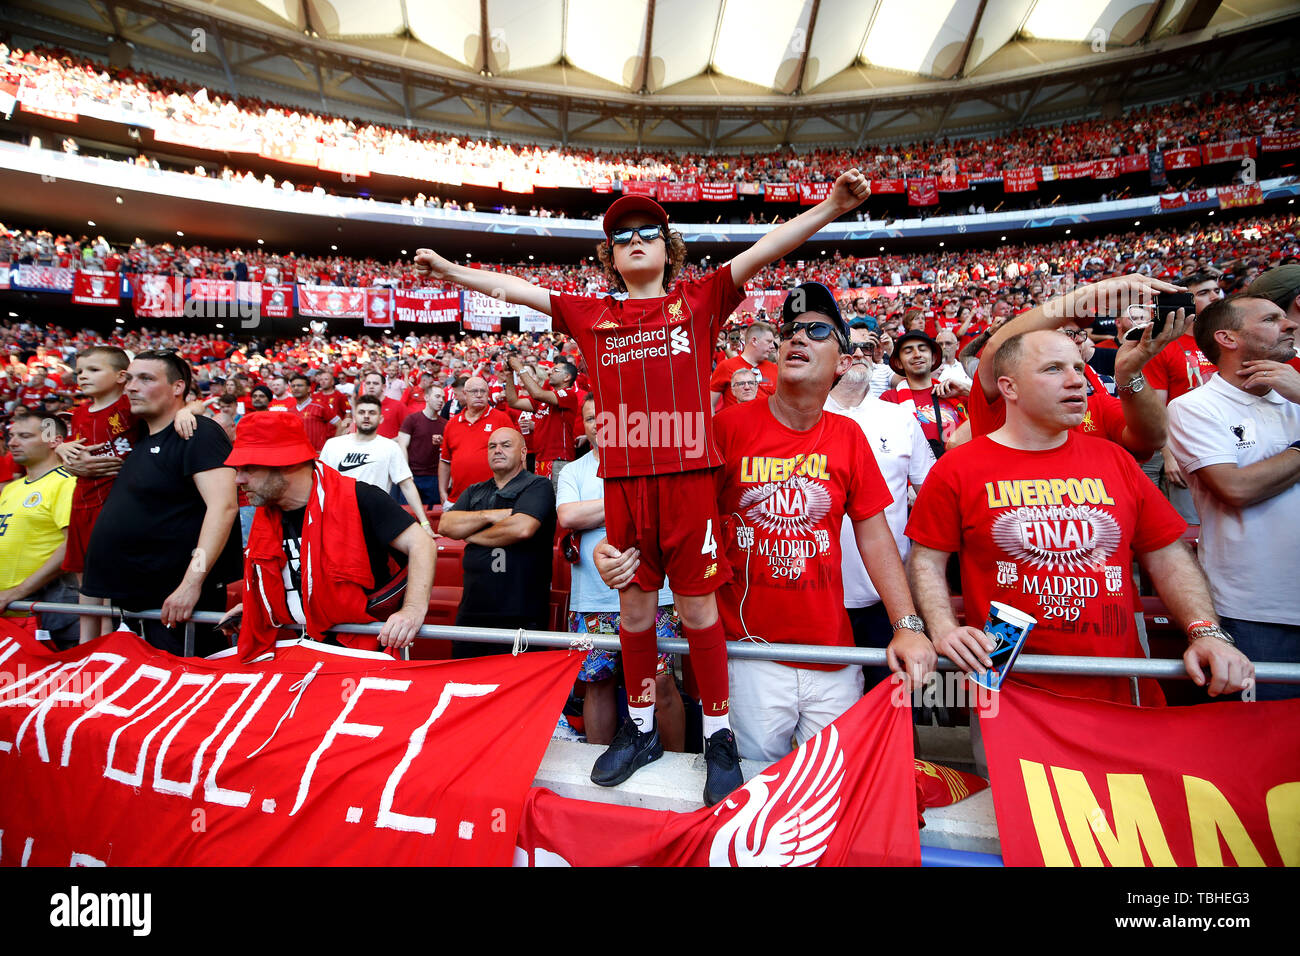 Liverpool fans show support for their team in the stands during the UEFA Champions  League Final at the Wanda Metropolitano, Madrid Stock Photo - Alamy